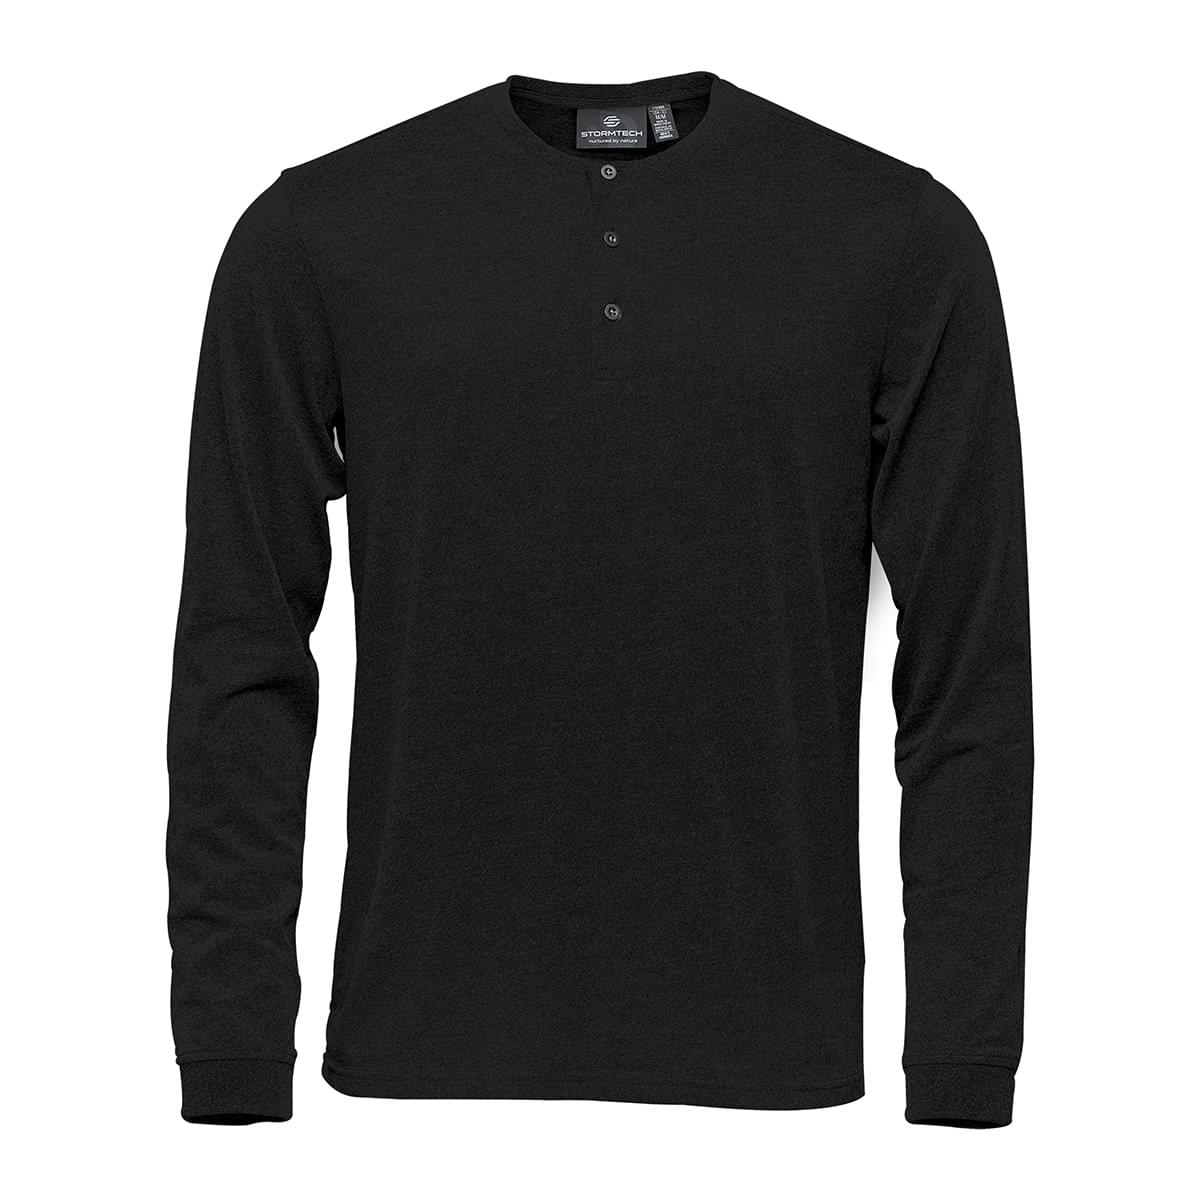 And Now This BRIGHT WHITE Men's Long-Sleeve Henley T-Shirt, US L